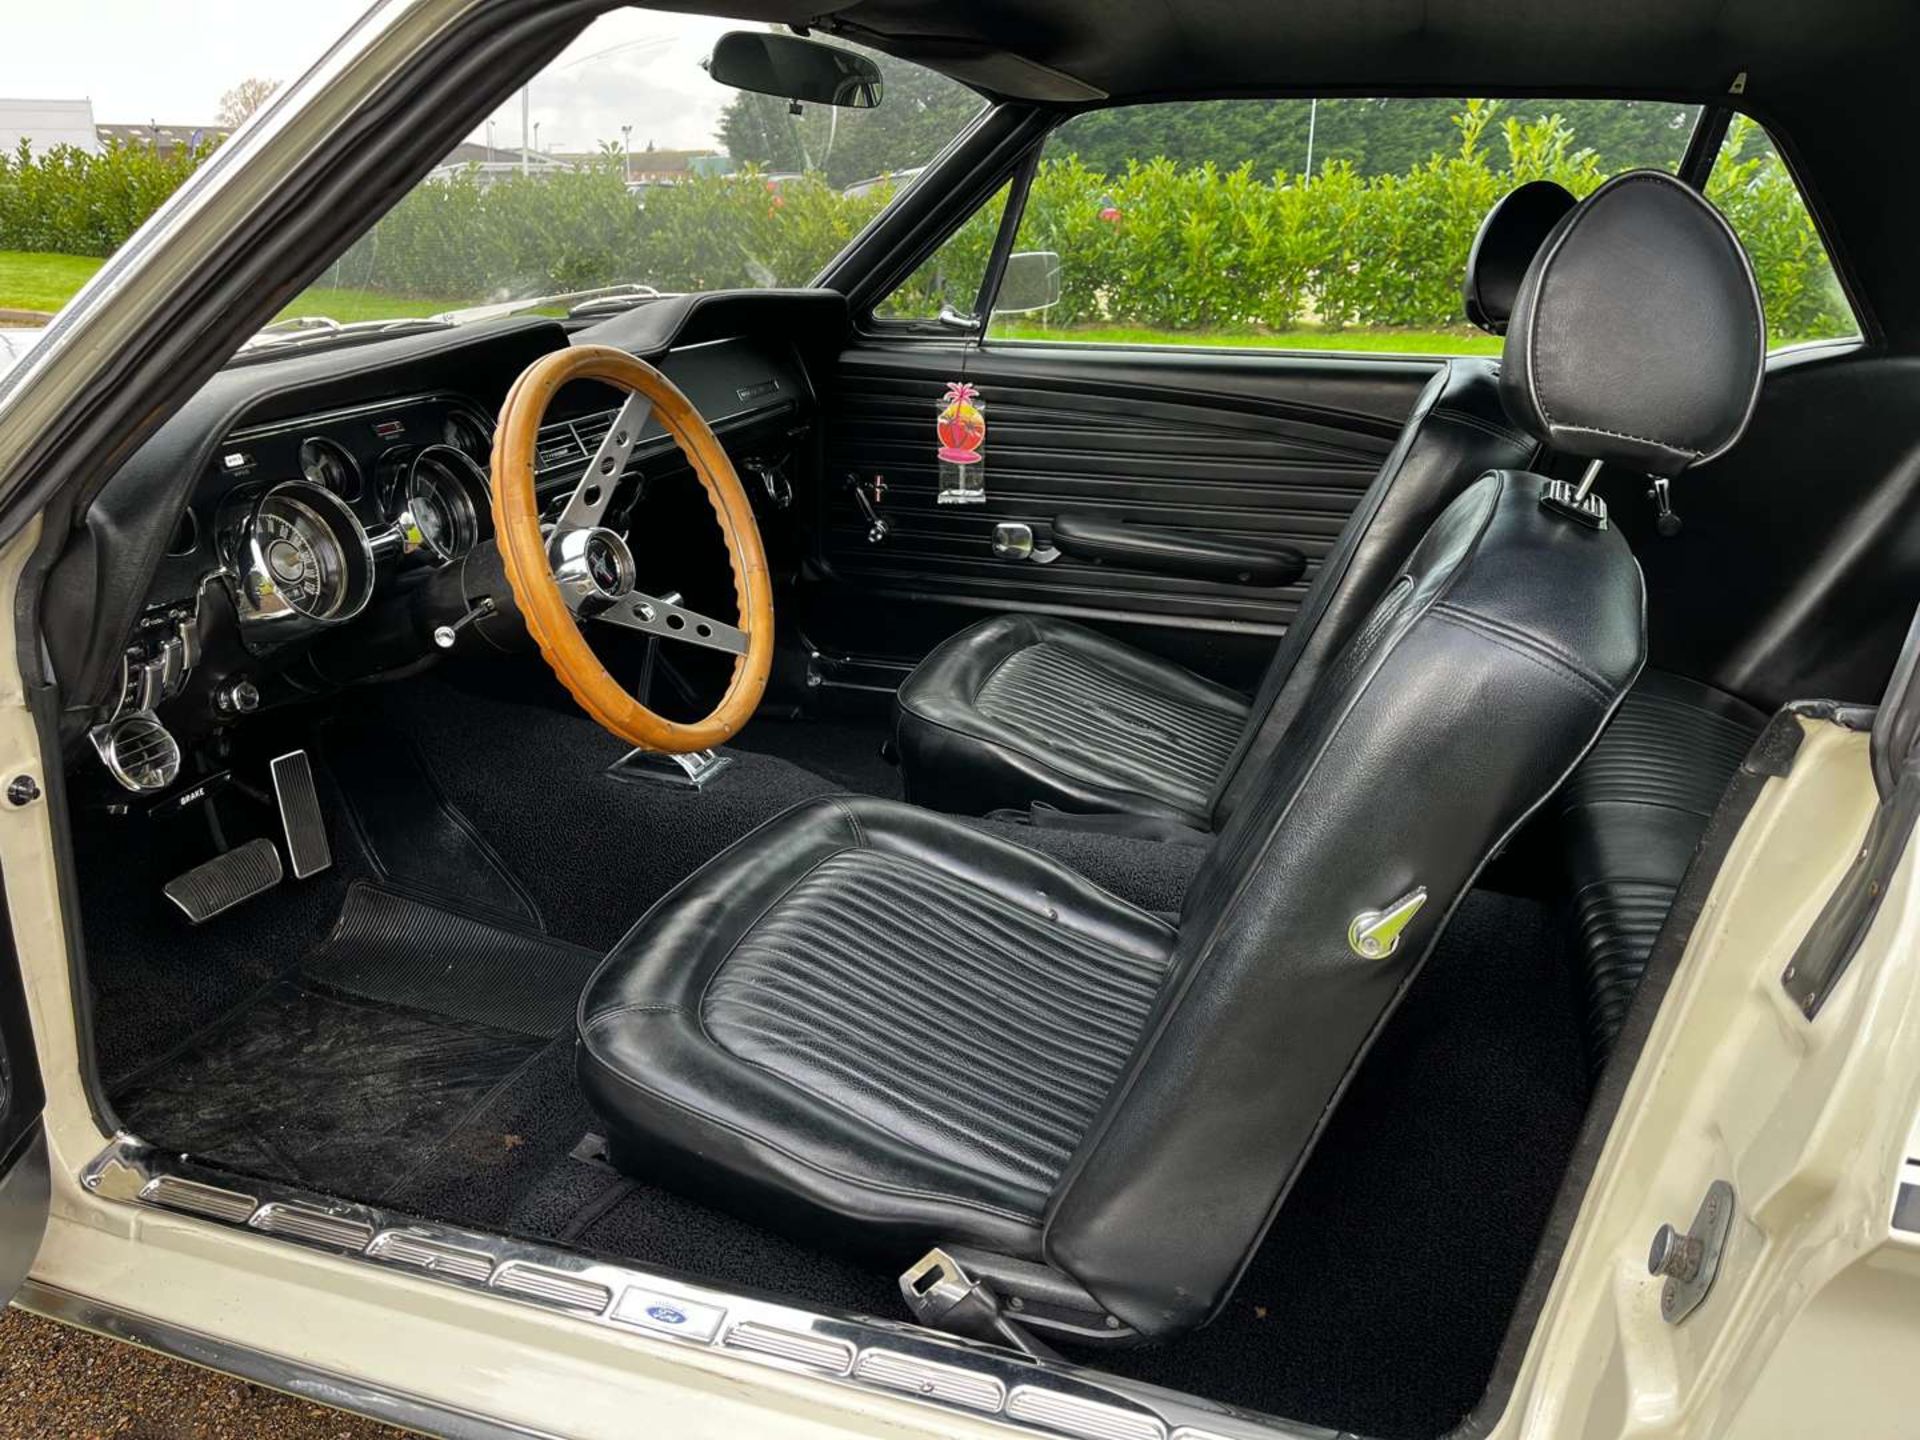 1968 FORD MUSTANG 5.0 V8 AUTO COUPE LHD - Image 19 of 29